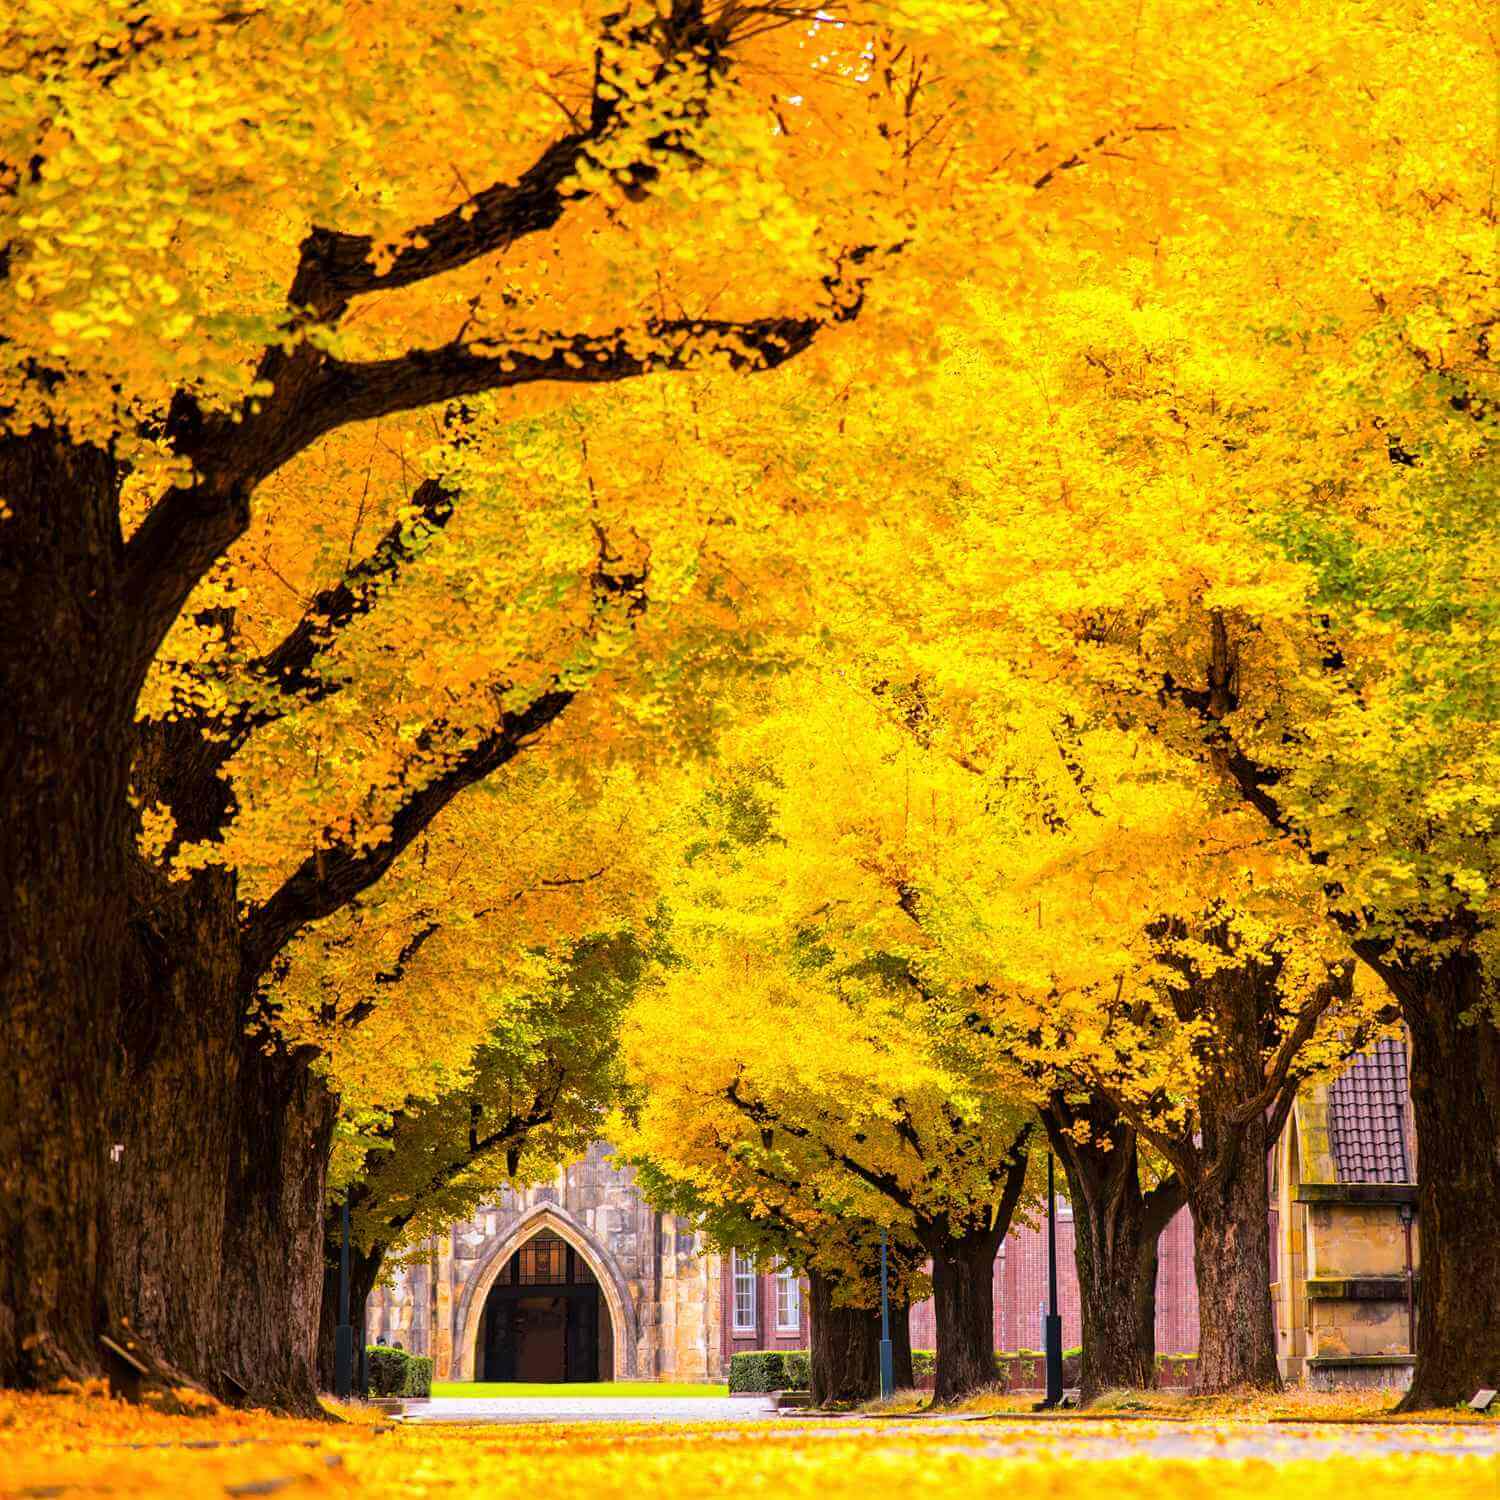 The Hongo campus of the University of Tokyo has beautiful autumn leaves in November, Tokyo = Shutterstock 2